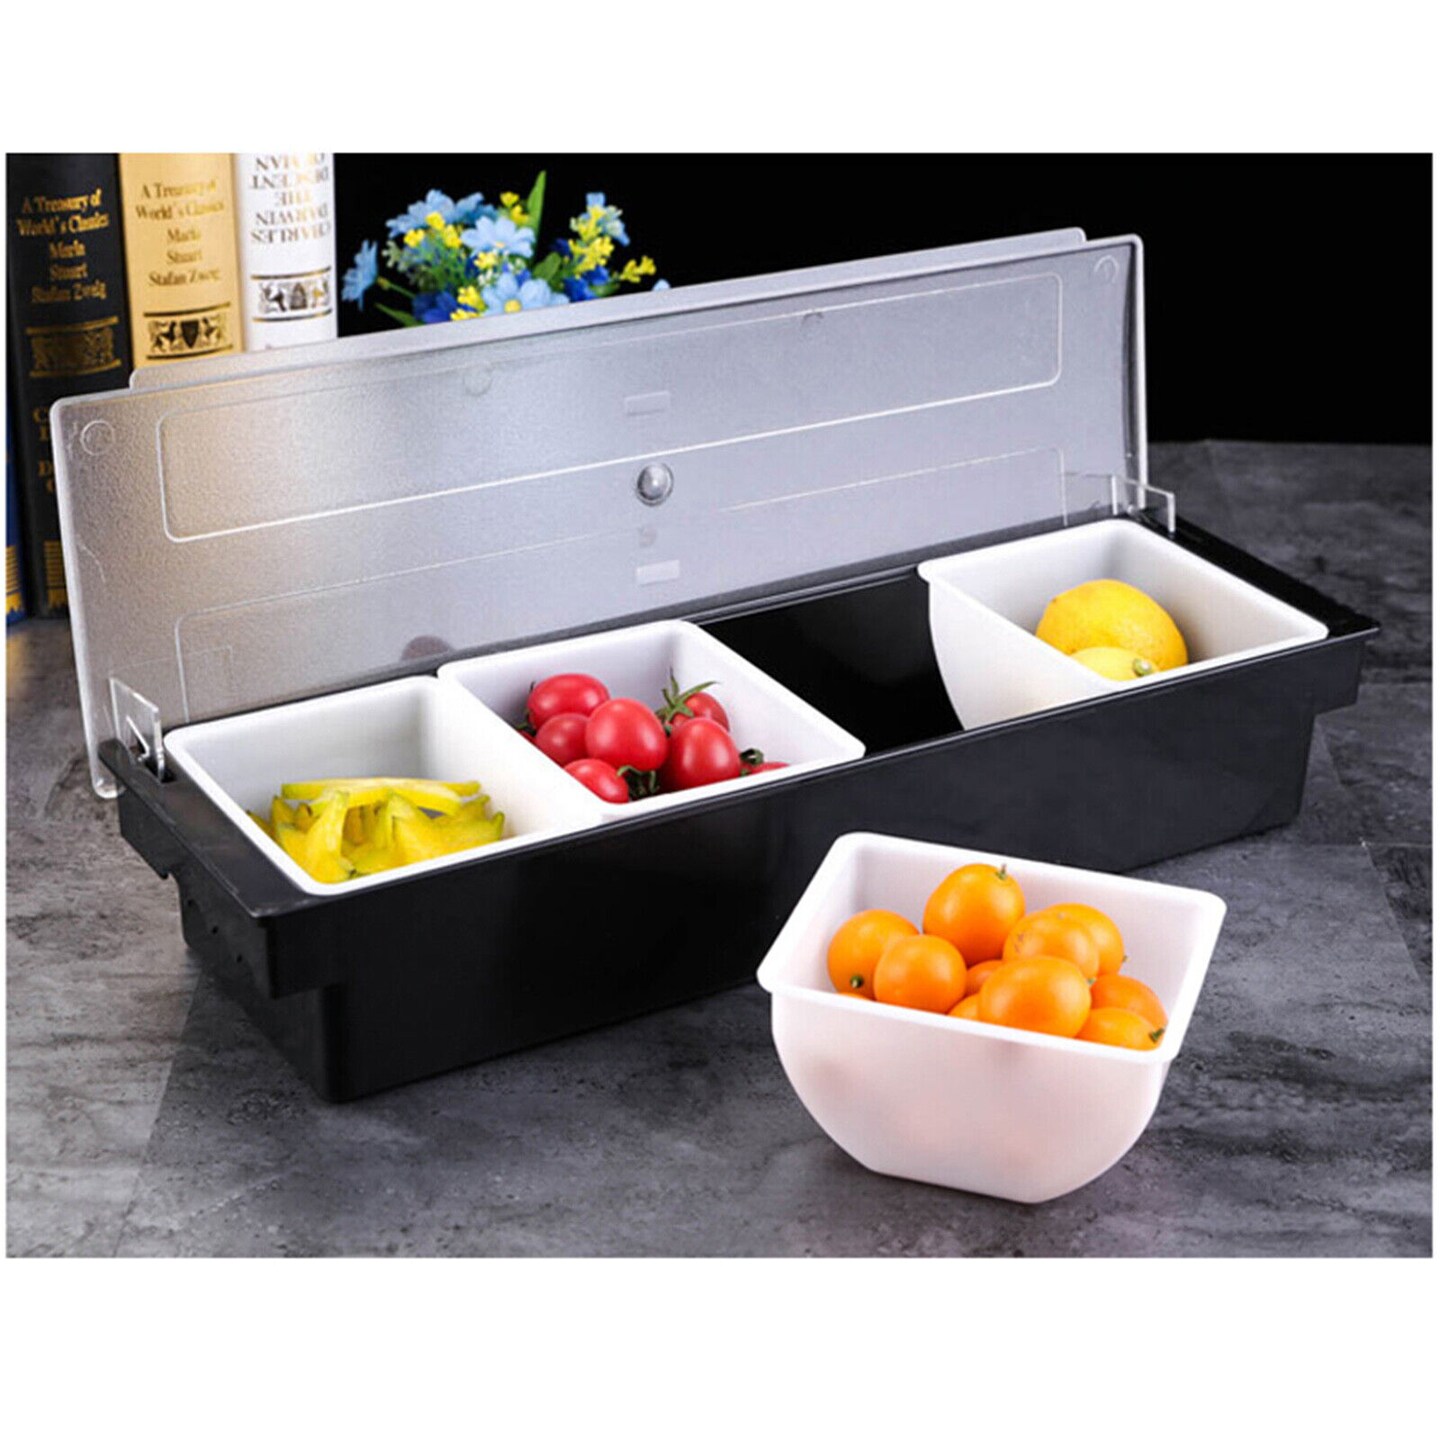 Kitcheniva Fruit Tray Container Caddy